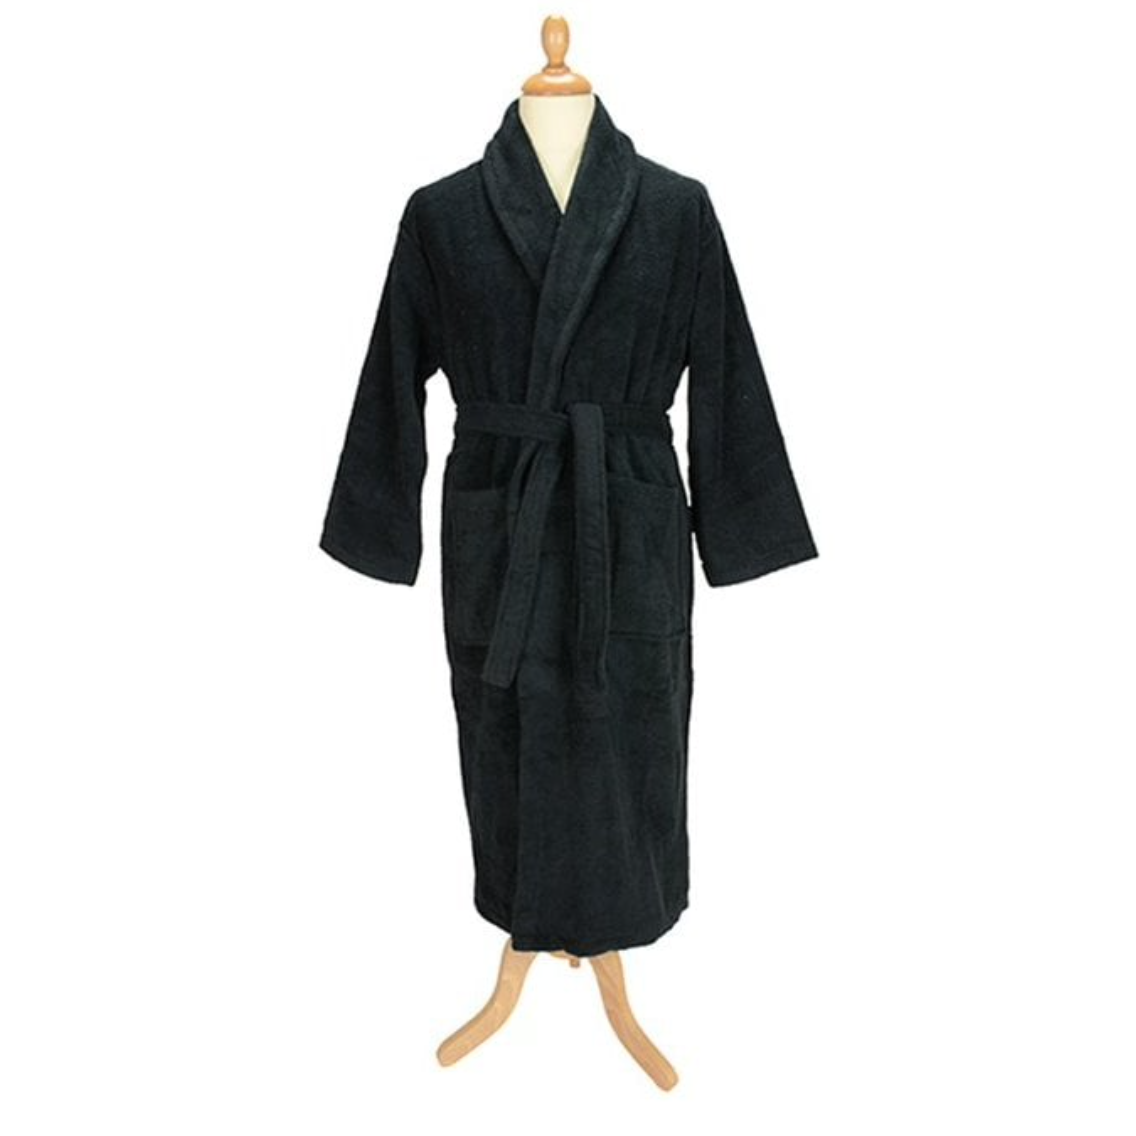 Luxury black dressing gown personalised initials and name